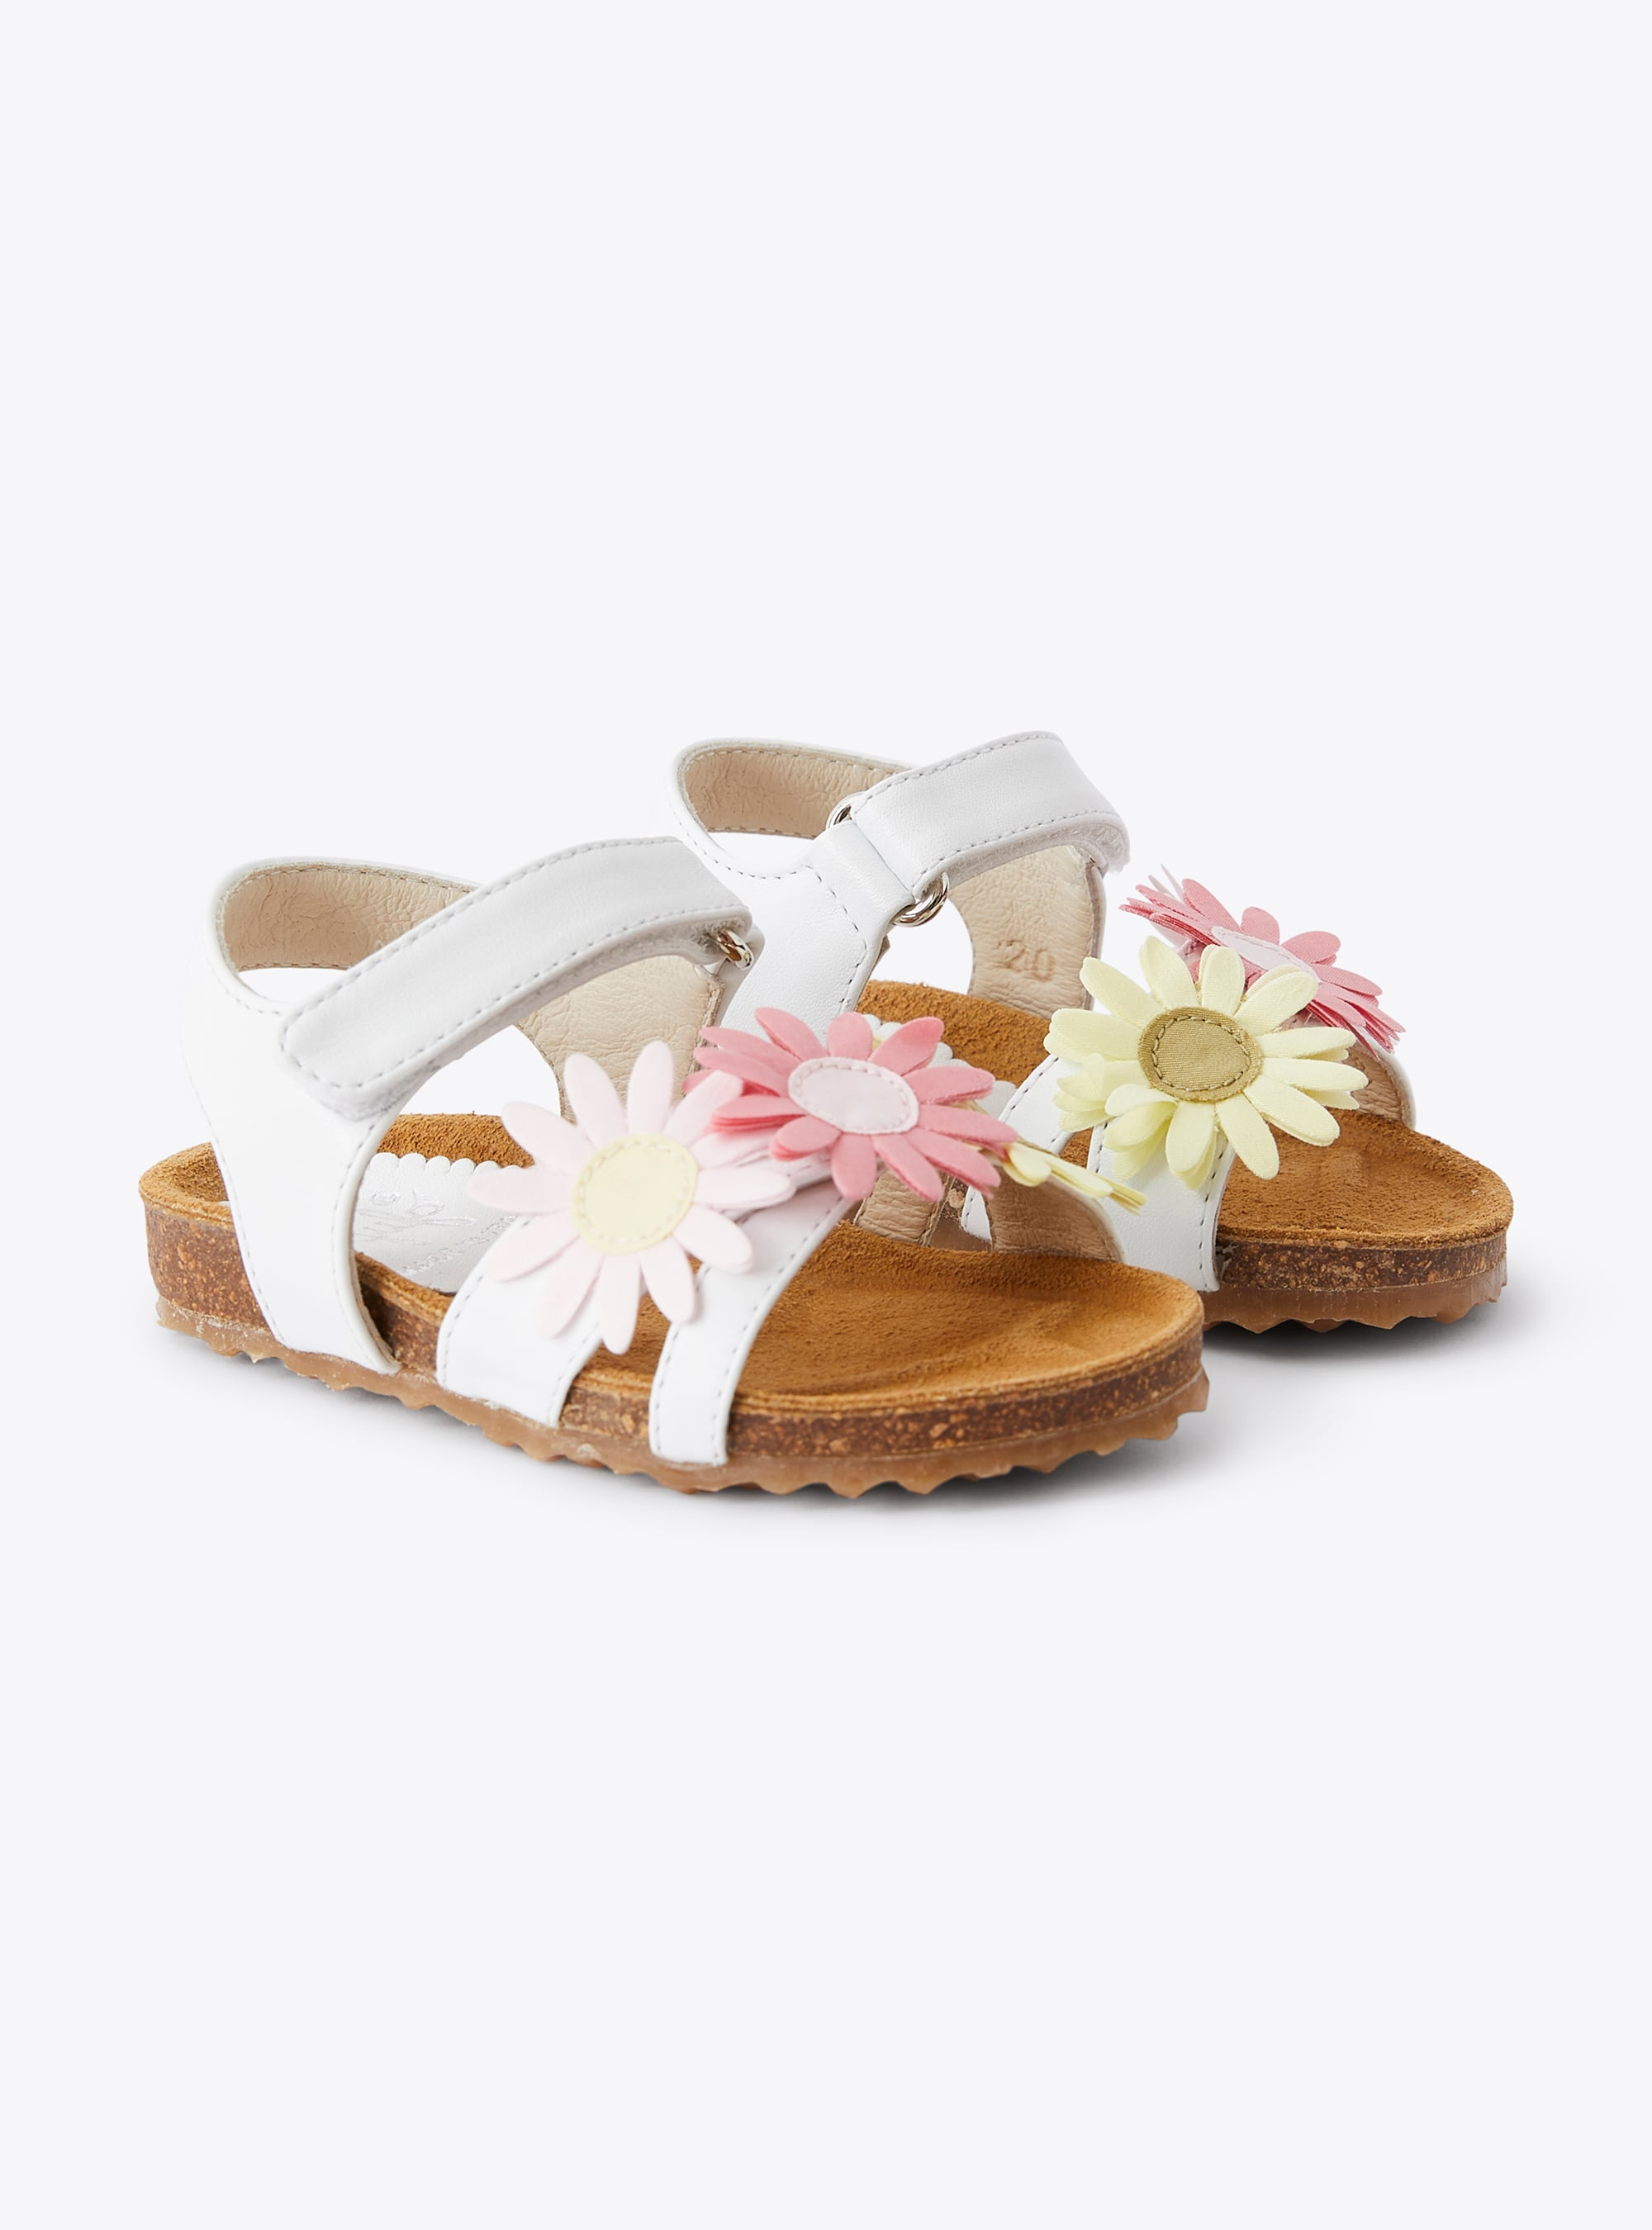 Leather sandal with flowers - Shoes - Il Gufo